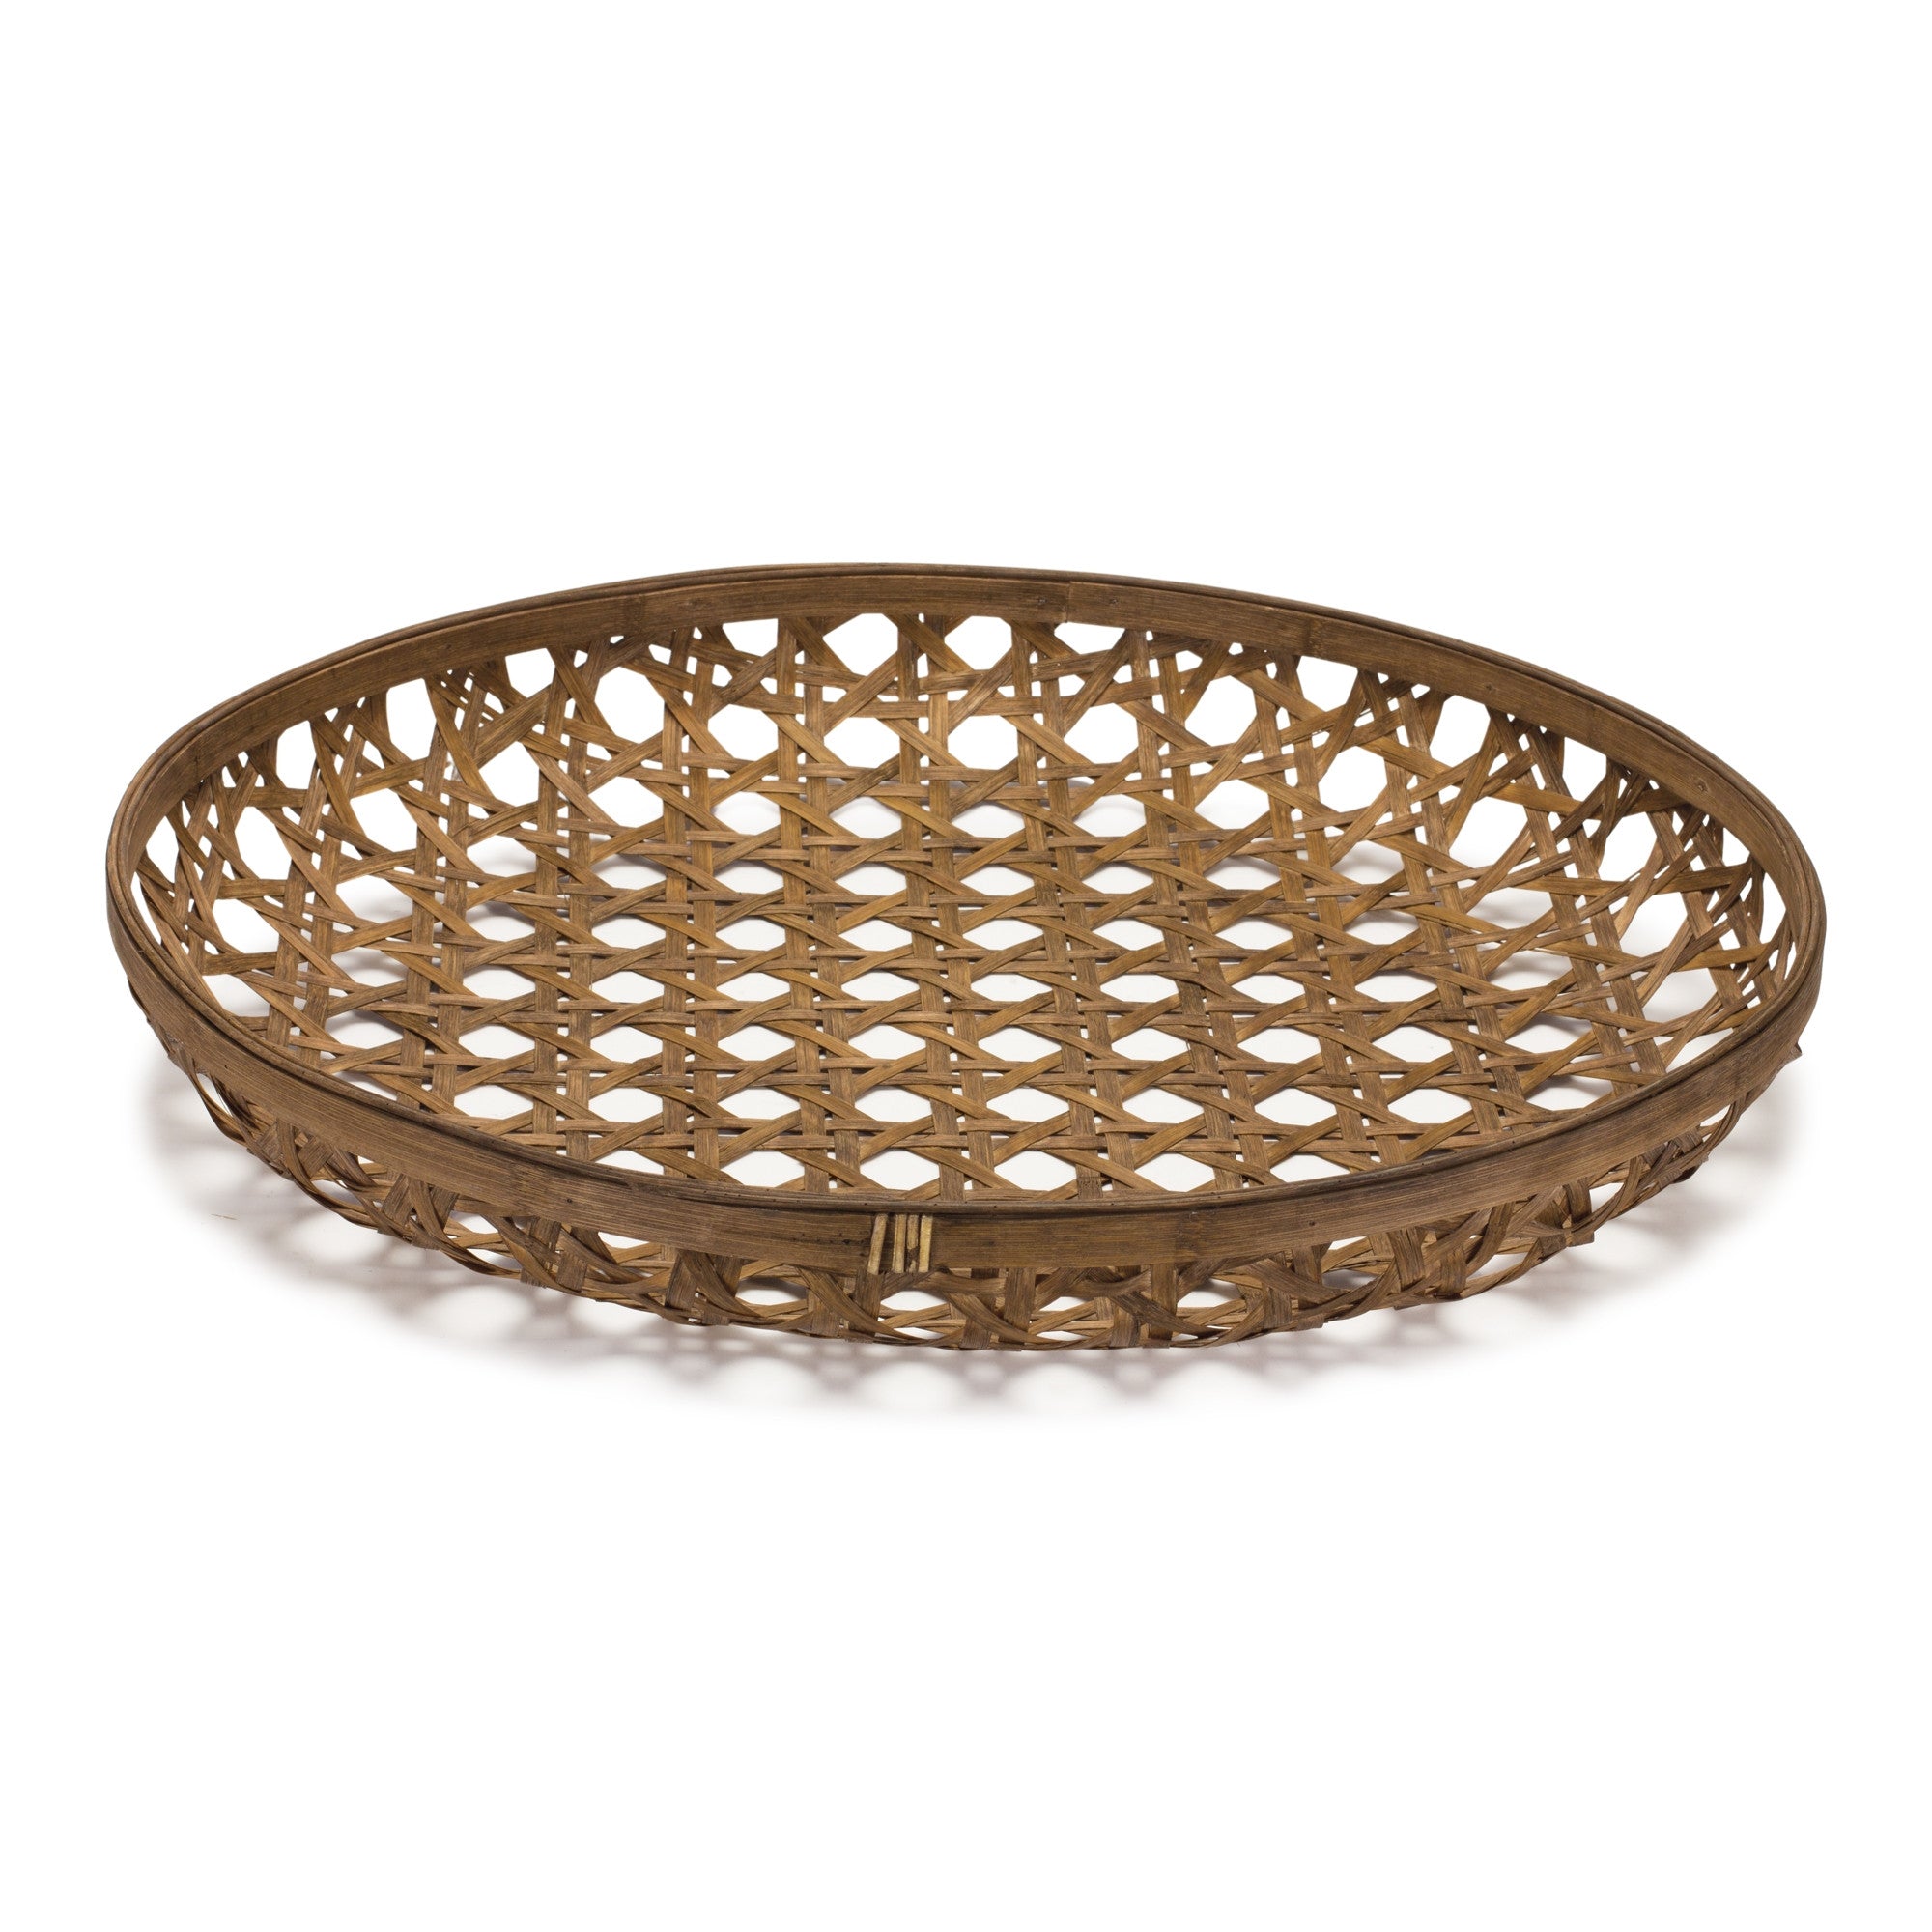 26" Brown Bamboo Weave Round Wood Tray